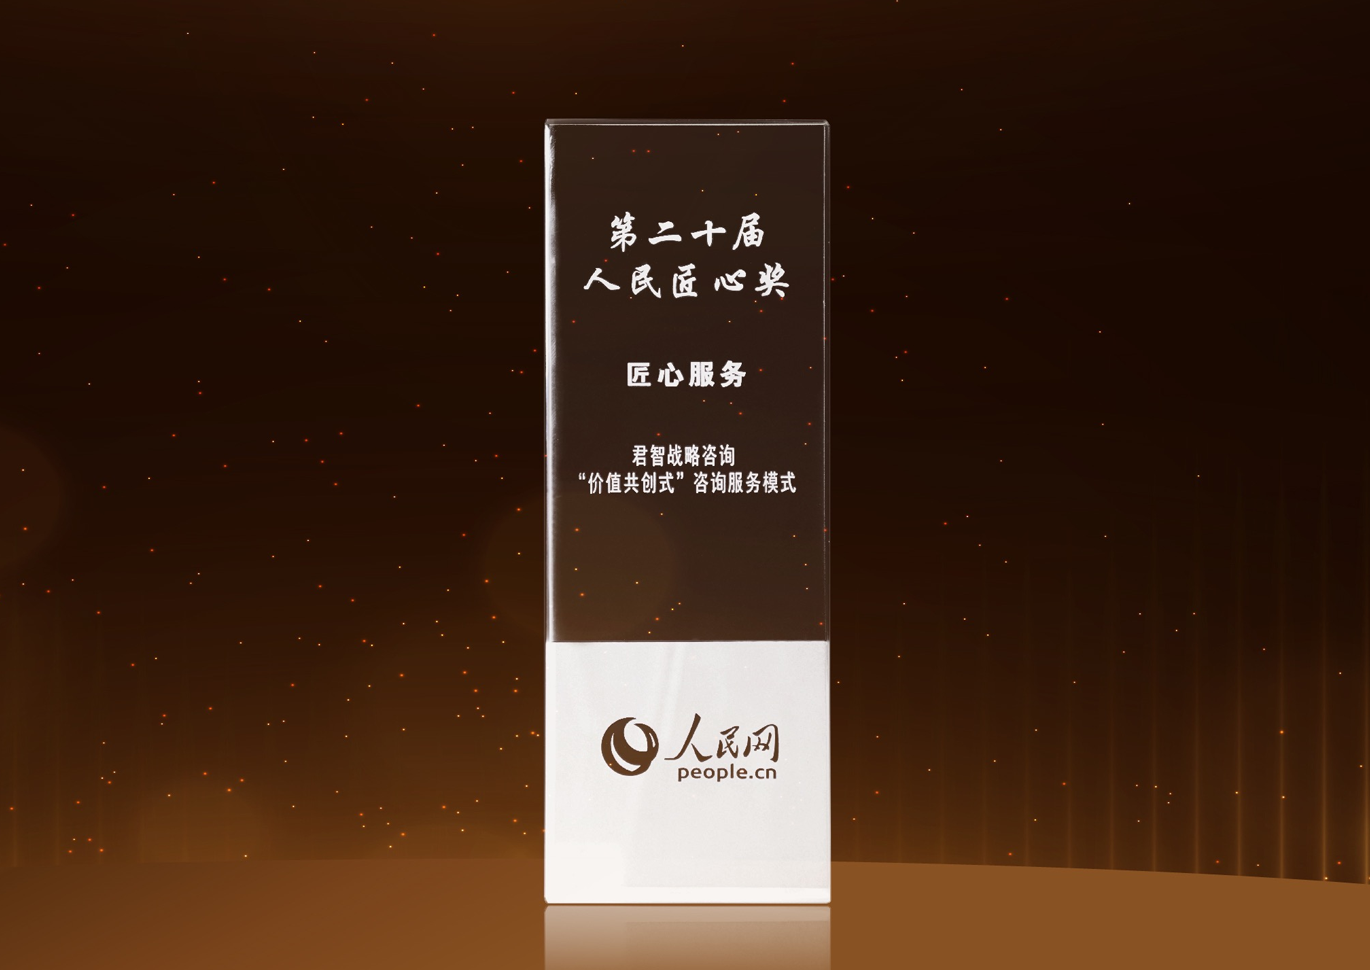 The 20th People's Daily Online “People’s Ingenuity Service Award